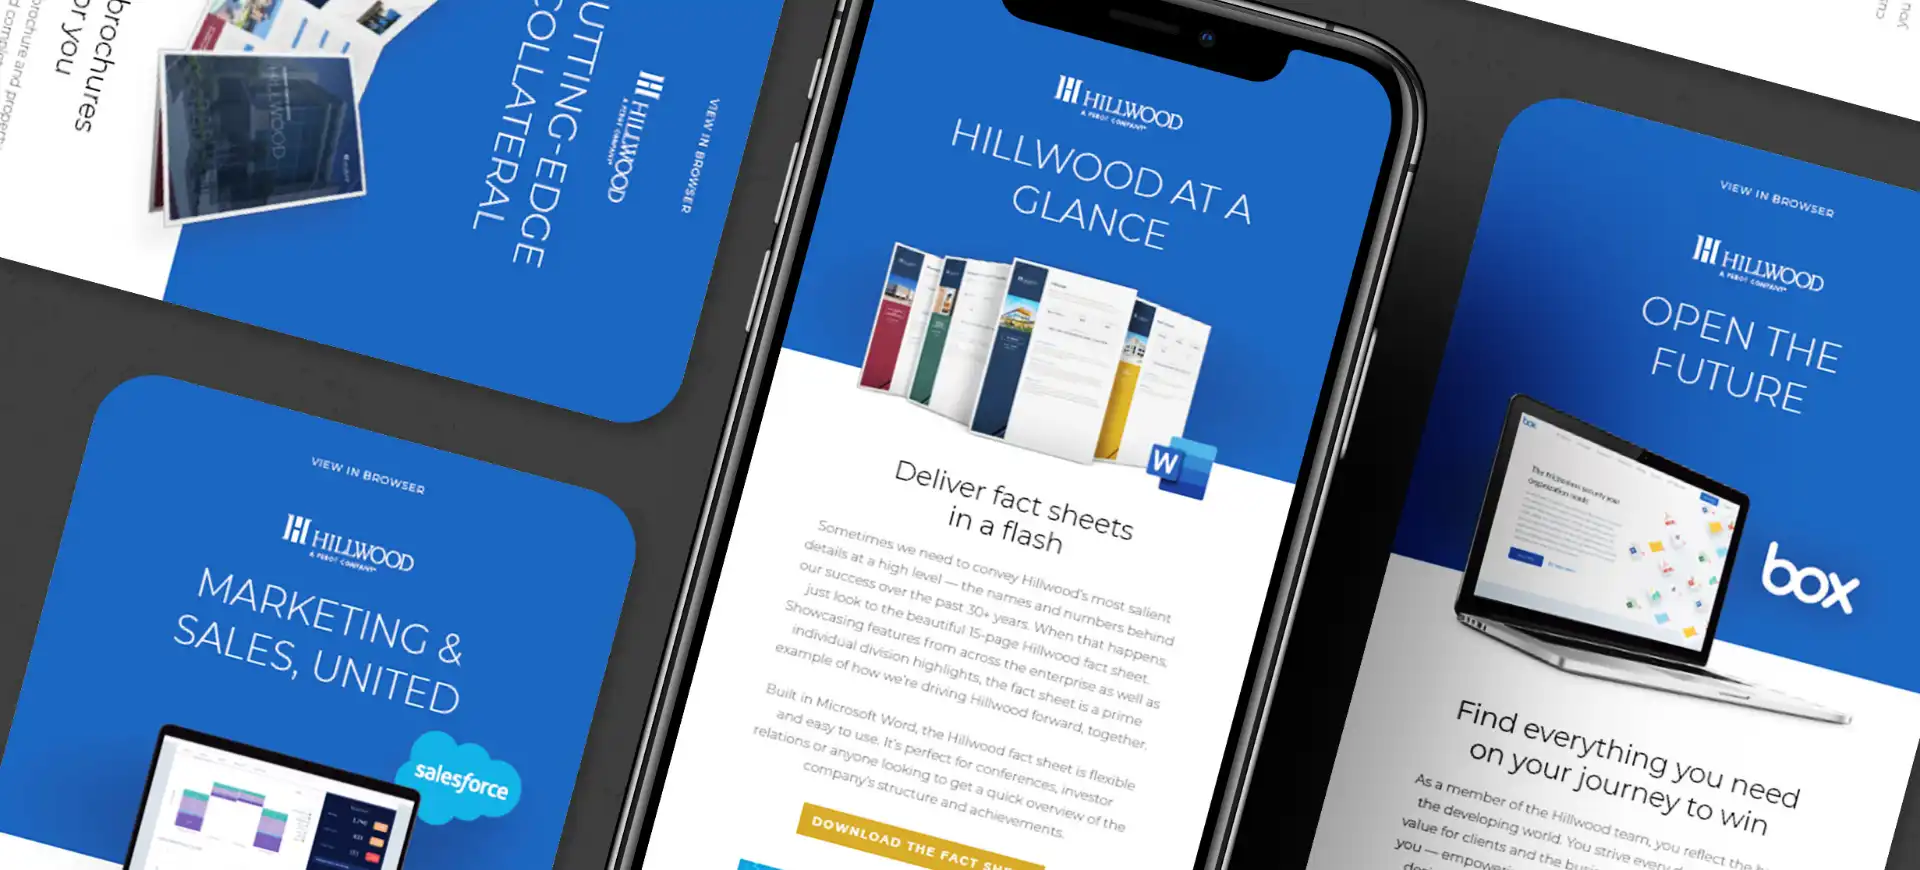 Mobile device with Hillwood screen on other assets